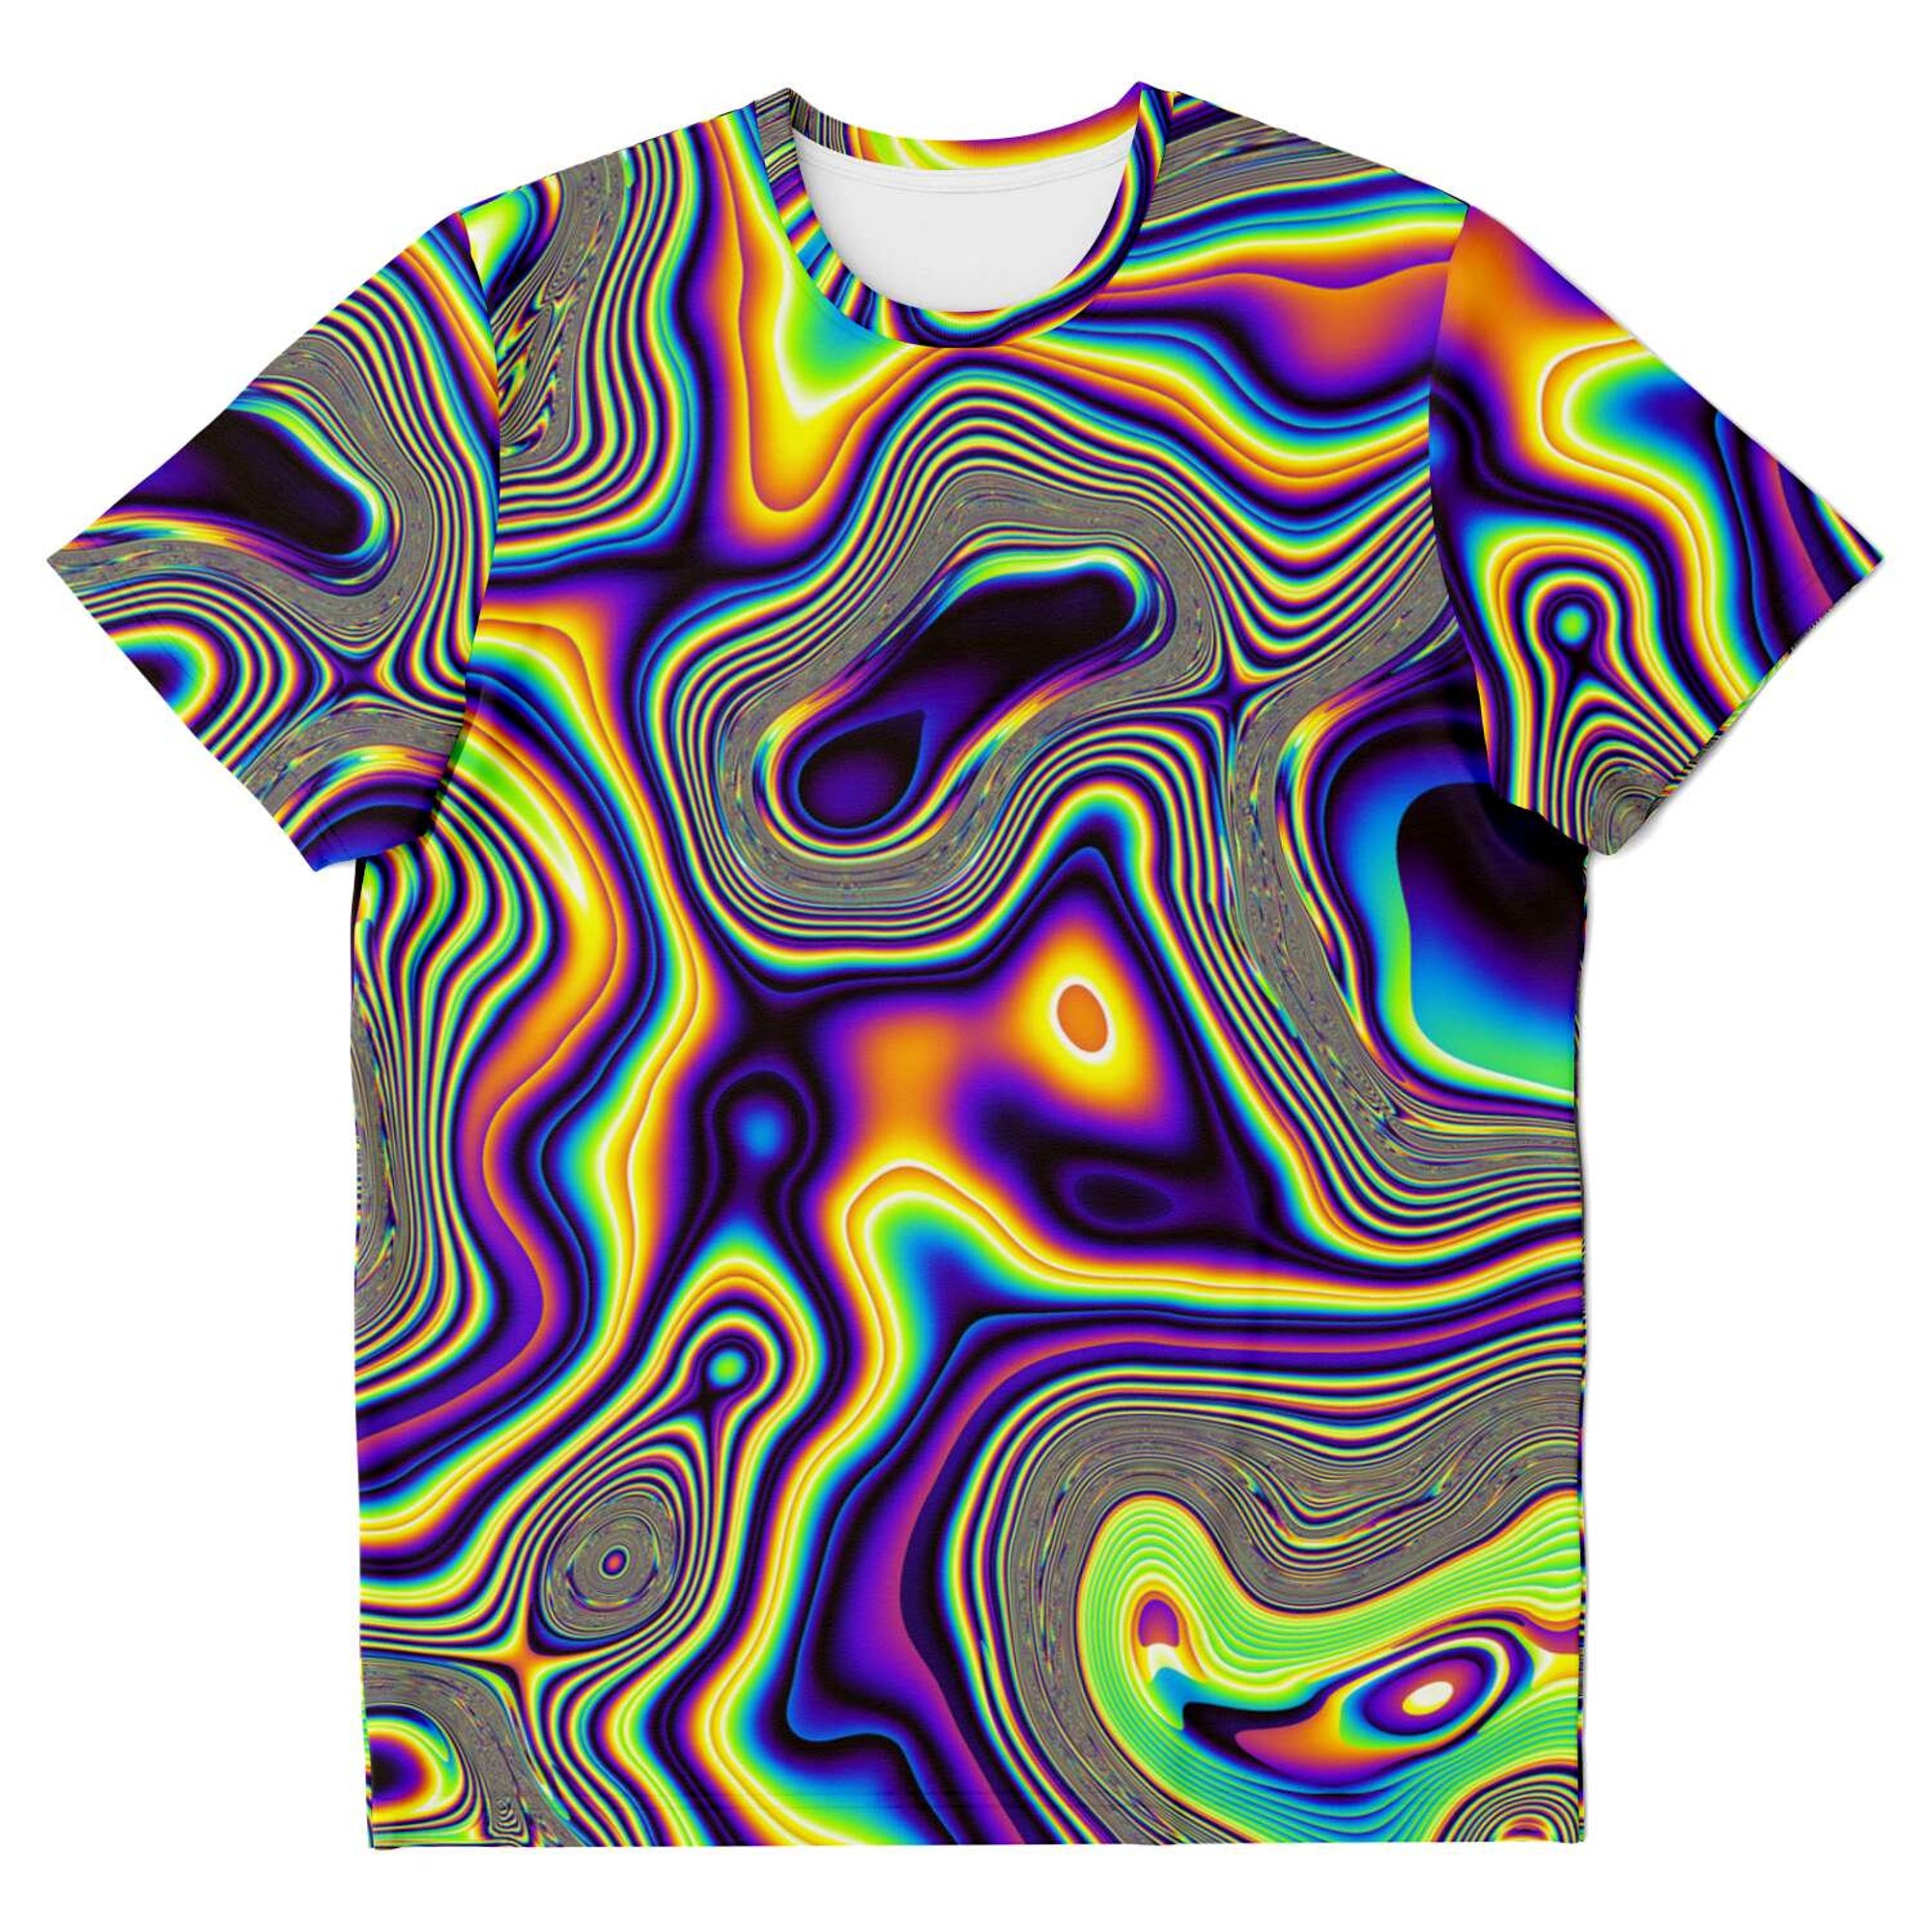 Discover Abstract Fractals Psychedelic Cells Dmt Lsd Trippy 3D T Shirt